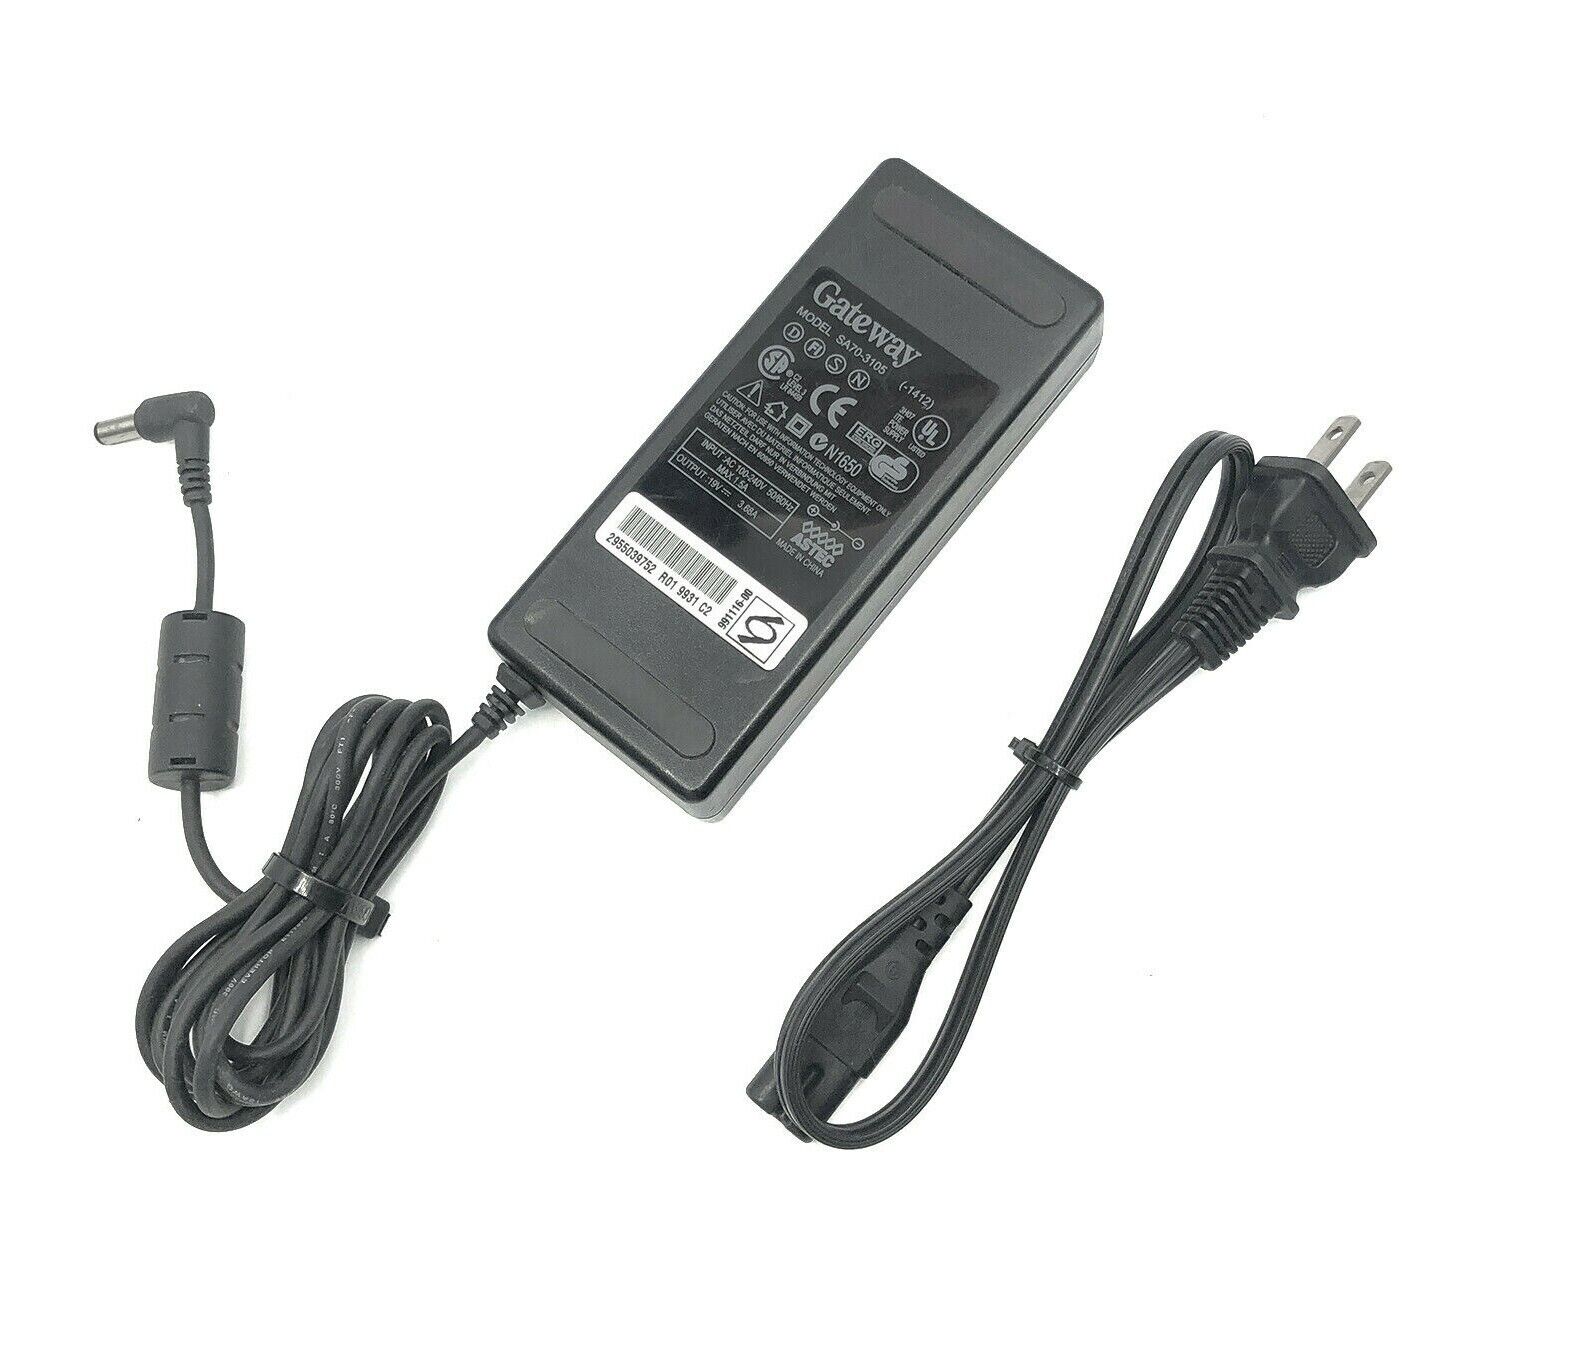 Original Gateway AC Charger Adapter for Gateway Solo 9500 Laptop Series w/Cord